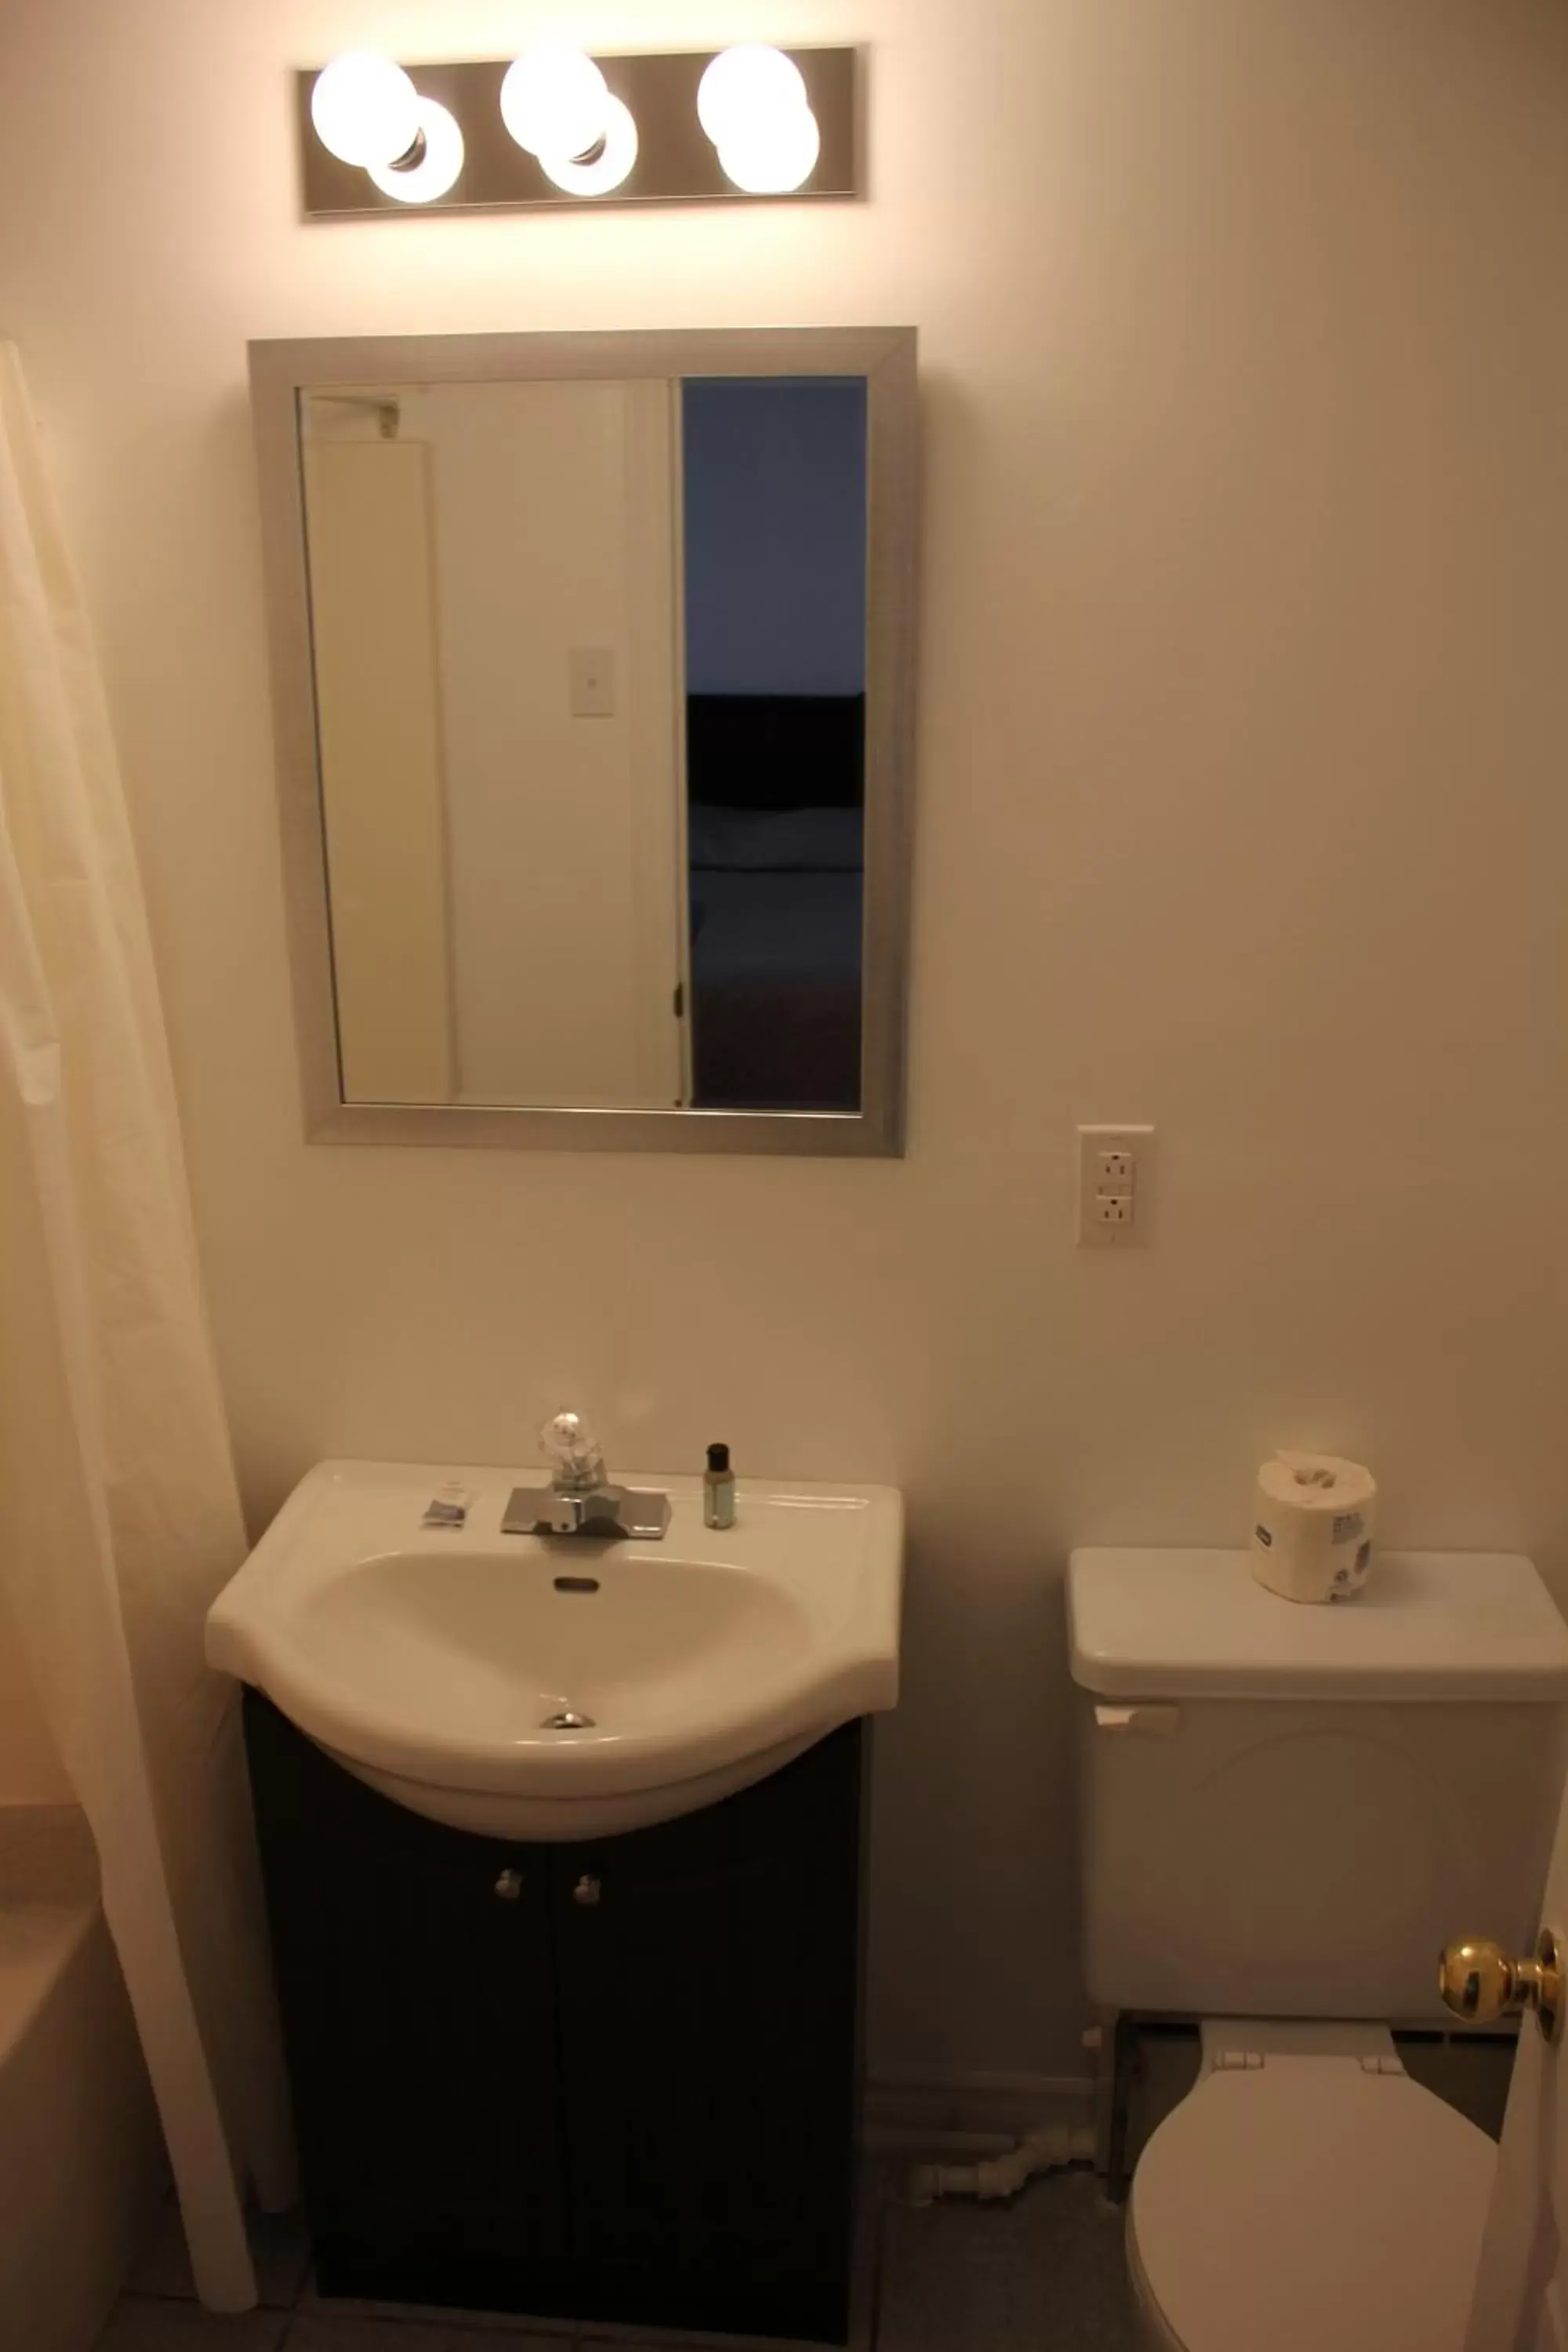 Bathroom in Stonehouse Motel and Restaurant